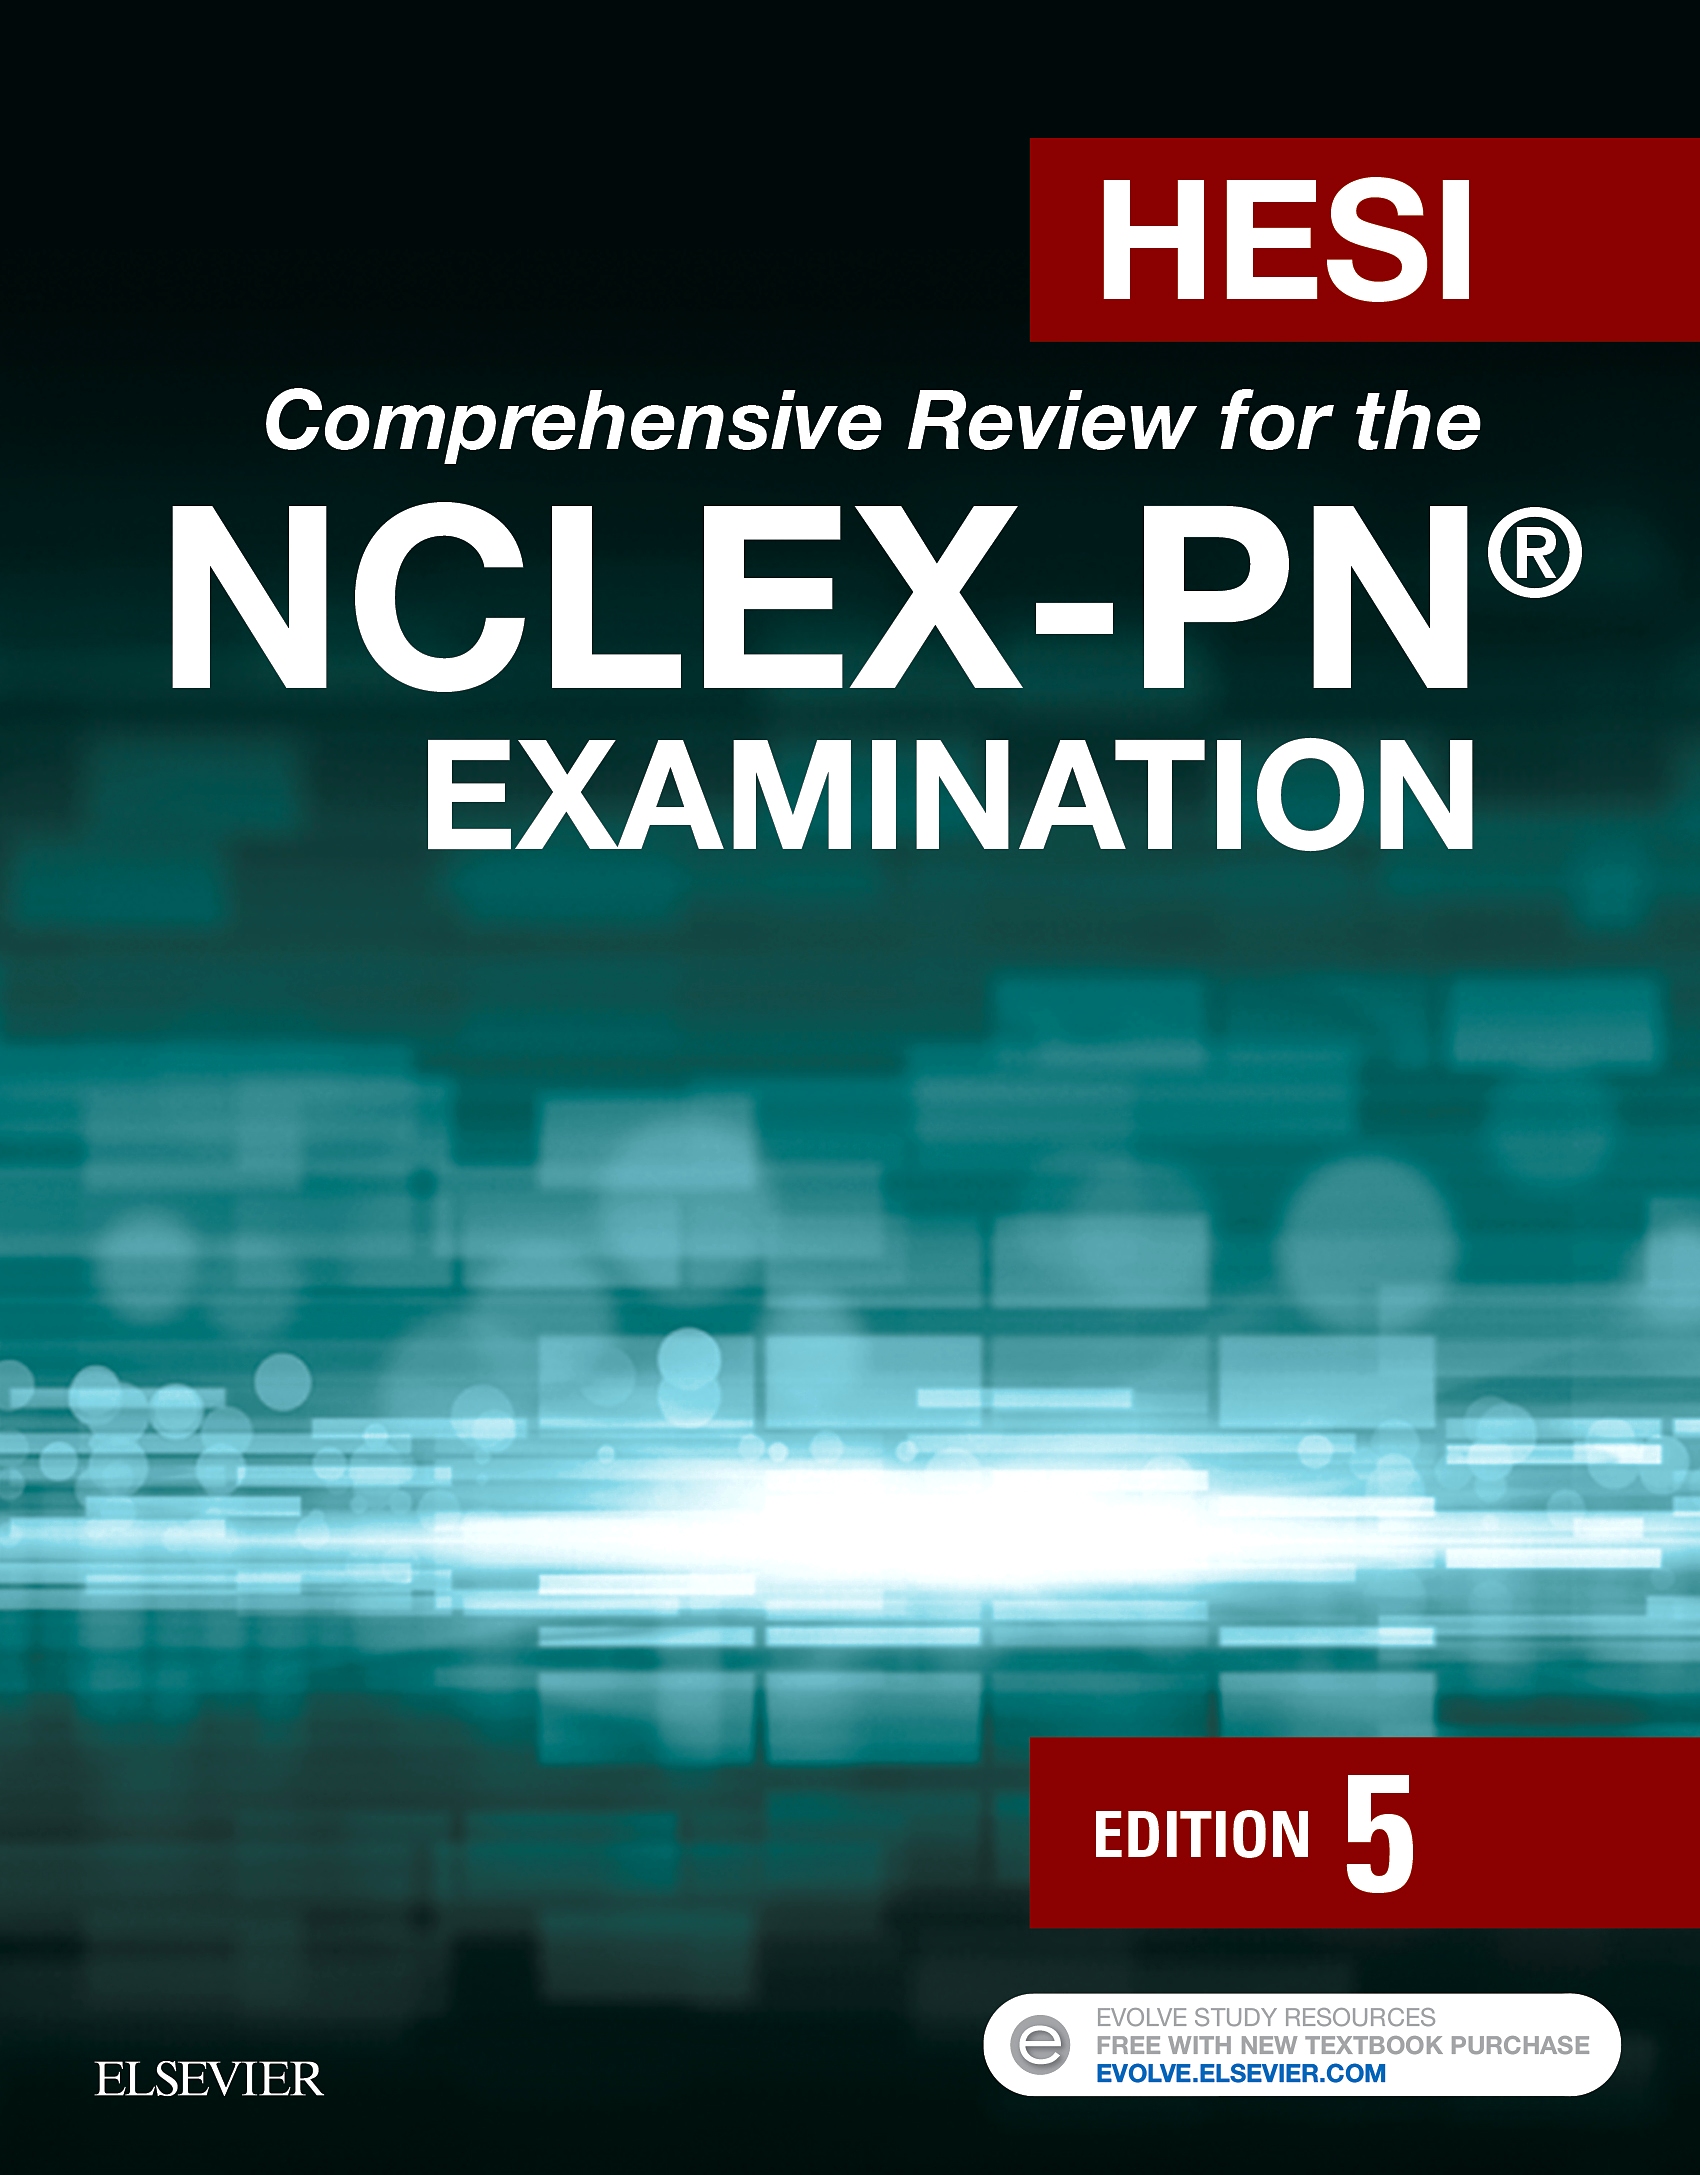 Evolve Resources for HESI Comprehensive Review for the NCLEX-PN® Examination, 5th Edition